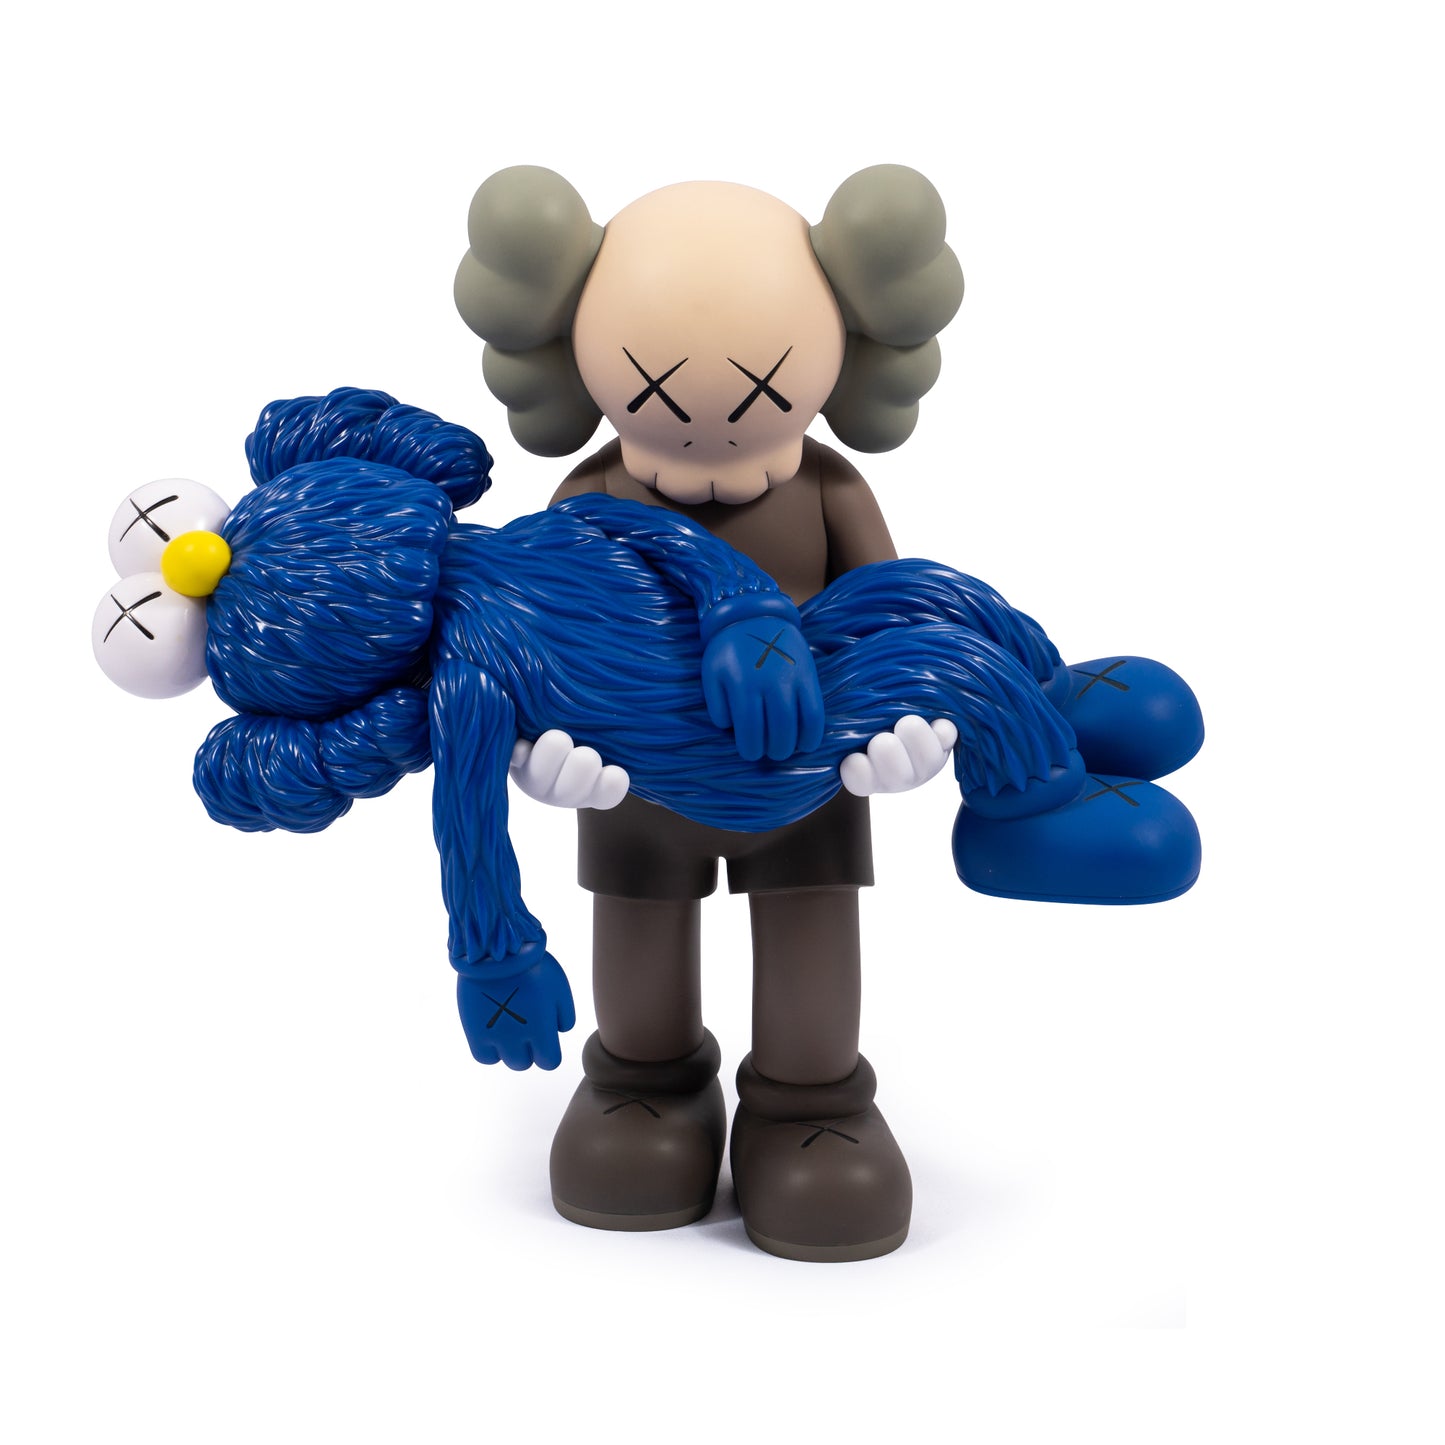 KAWS - Gone (Brown and Blue), 2019